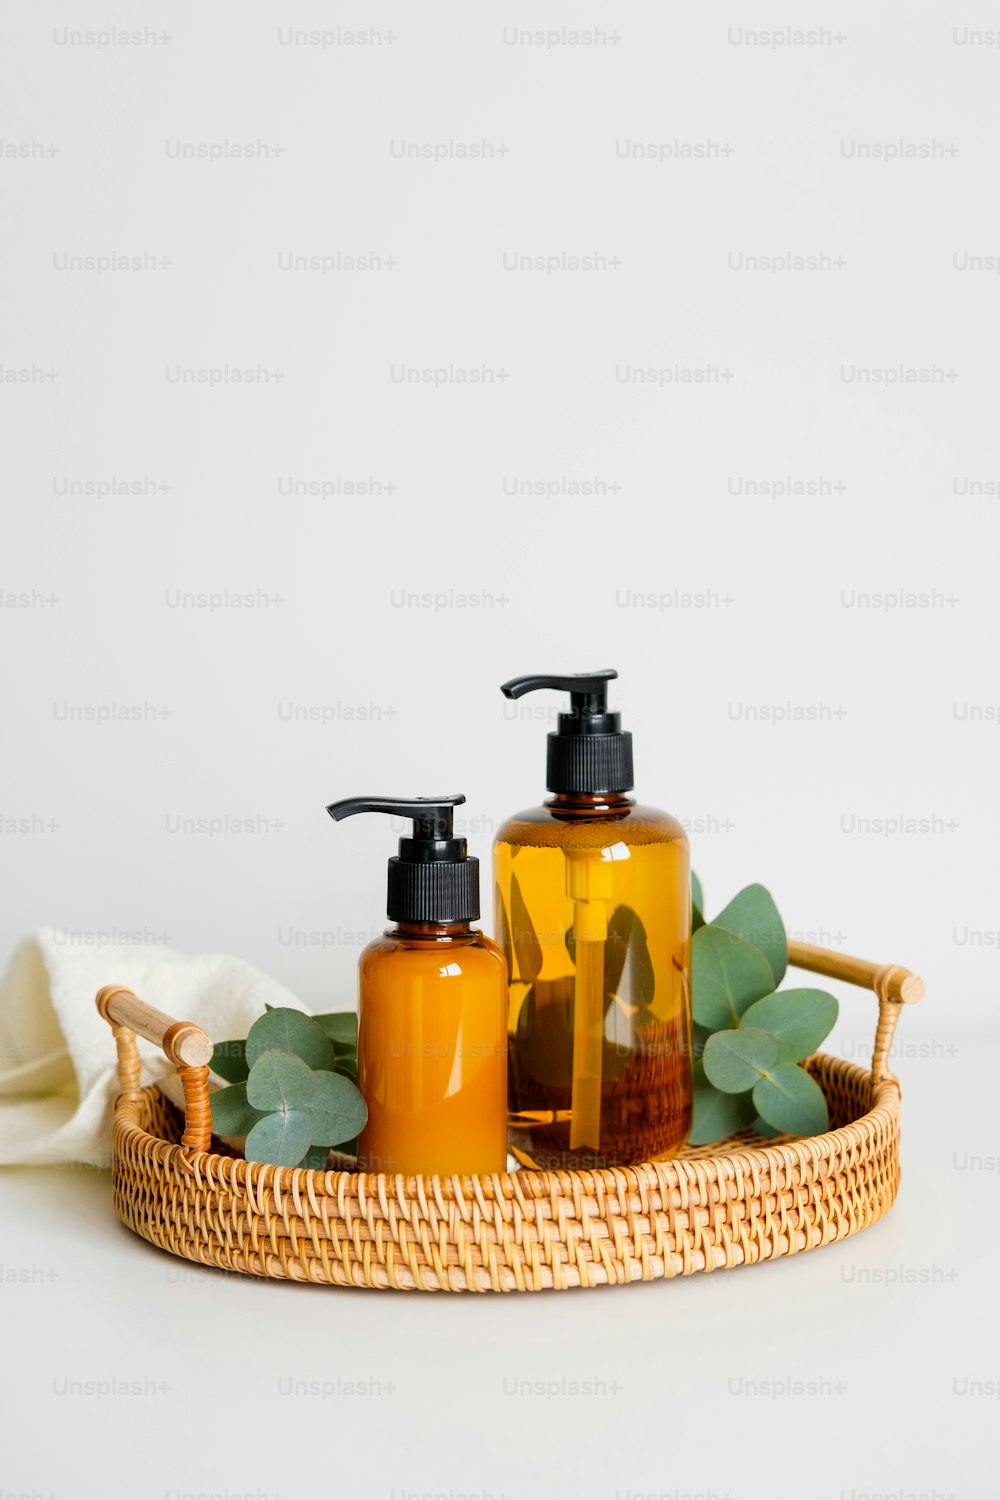 Rattan tray with amber glass pump bottles of shampoo or shower gel, eucalyptus plant branches, towel. SPA natural organic cosmetics set on table in bathroom.